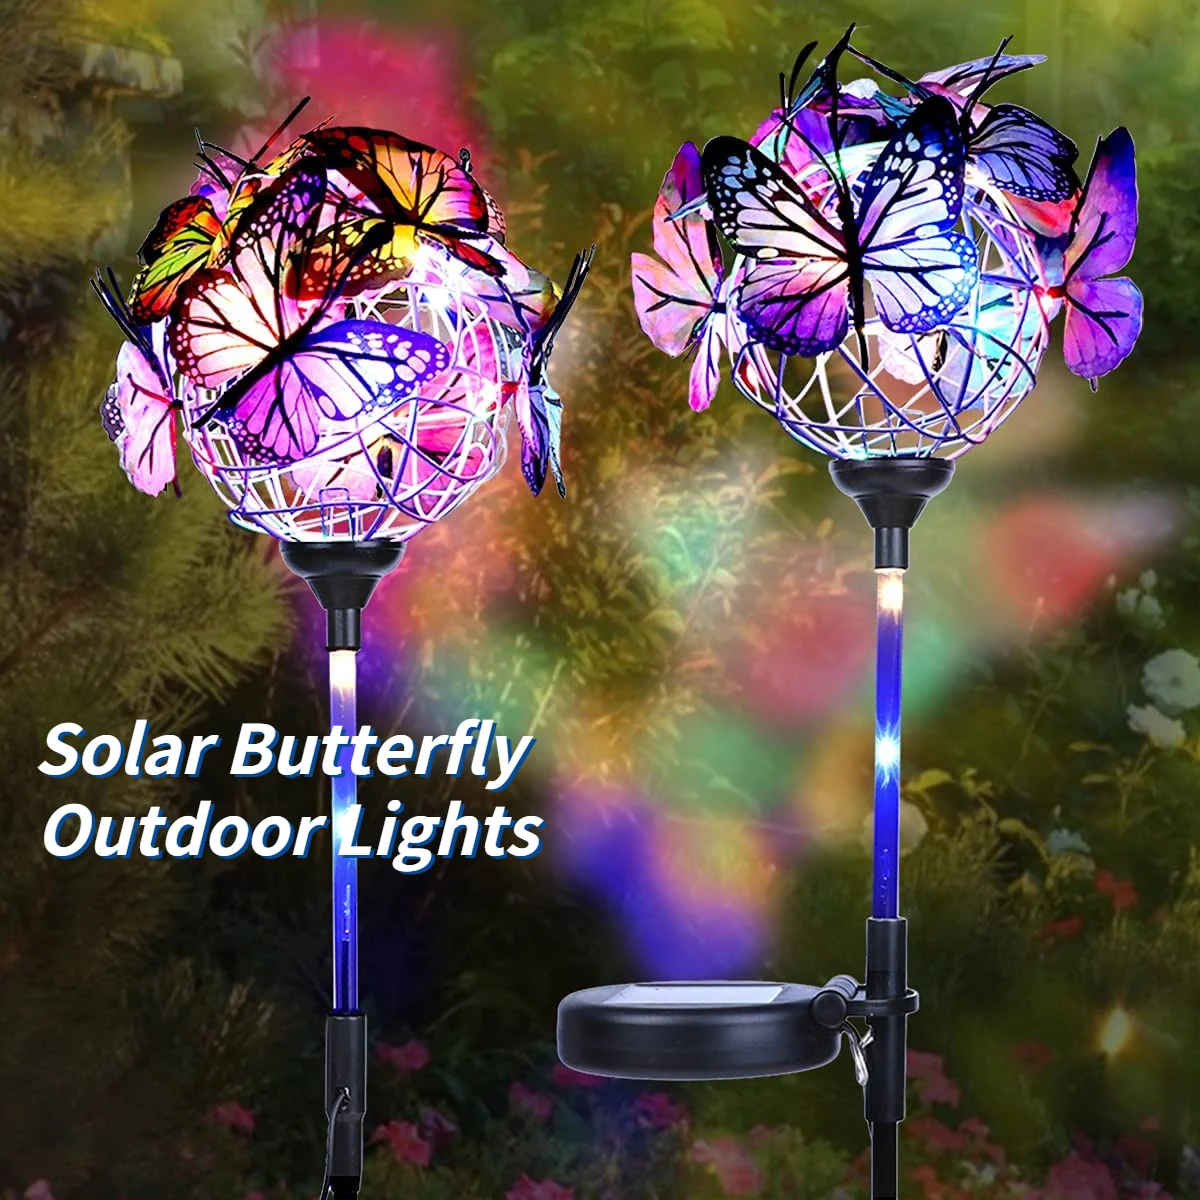 Solar LED Butterfly Ground Light Outdoor for Garden Lawn Decor Stake Lamp Waterproof Powered Dragonfly Butterfly Ball 2 Pack